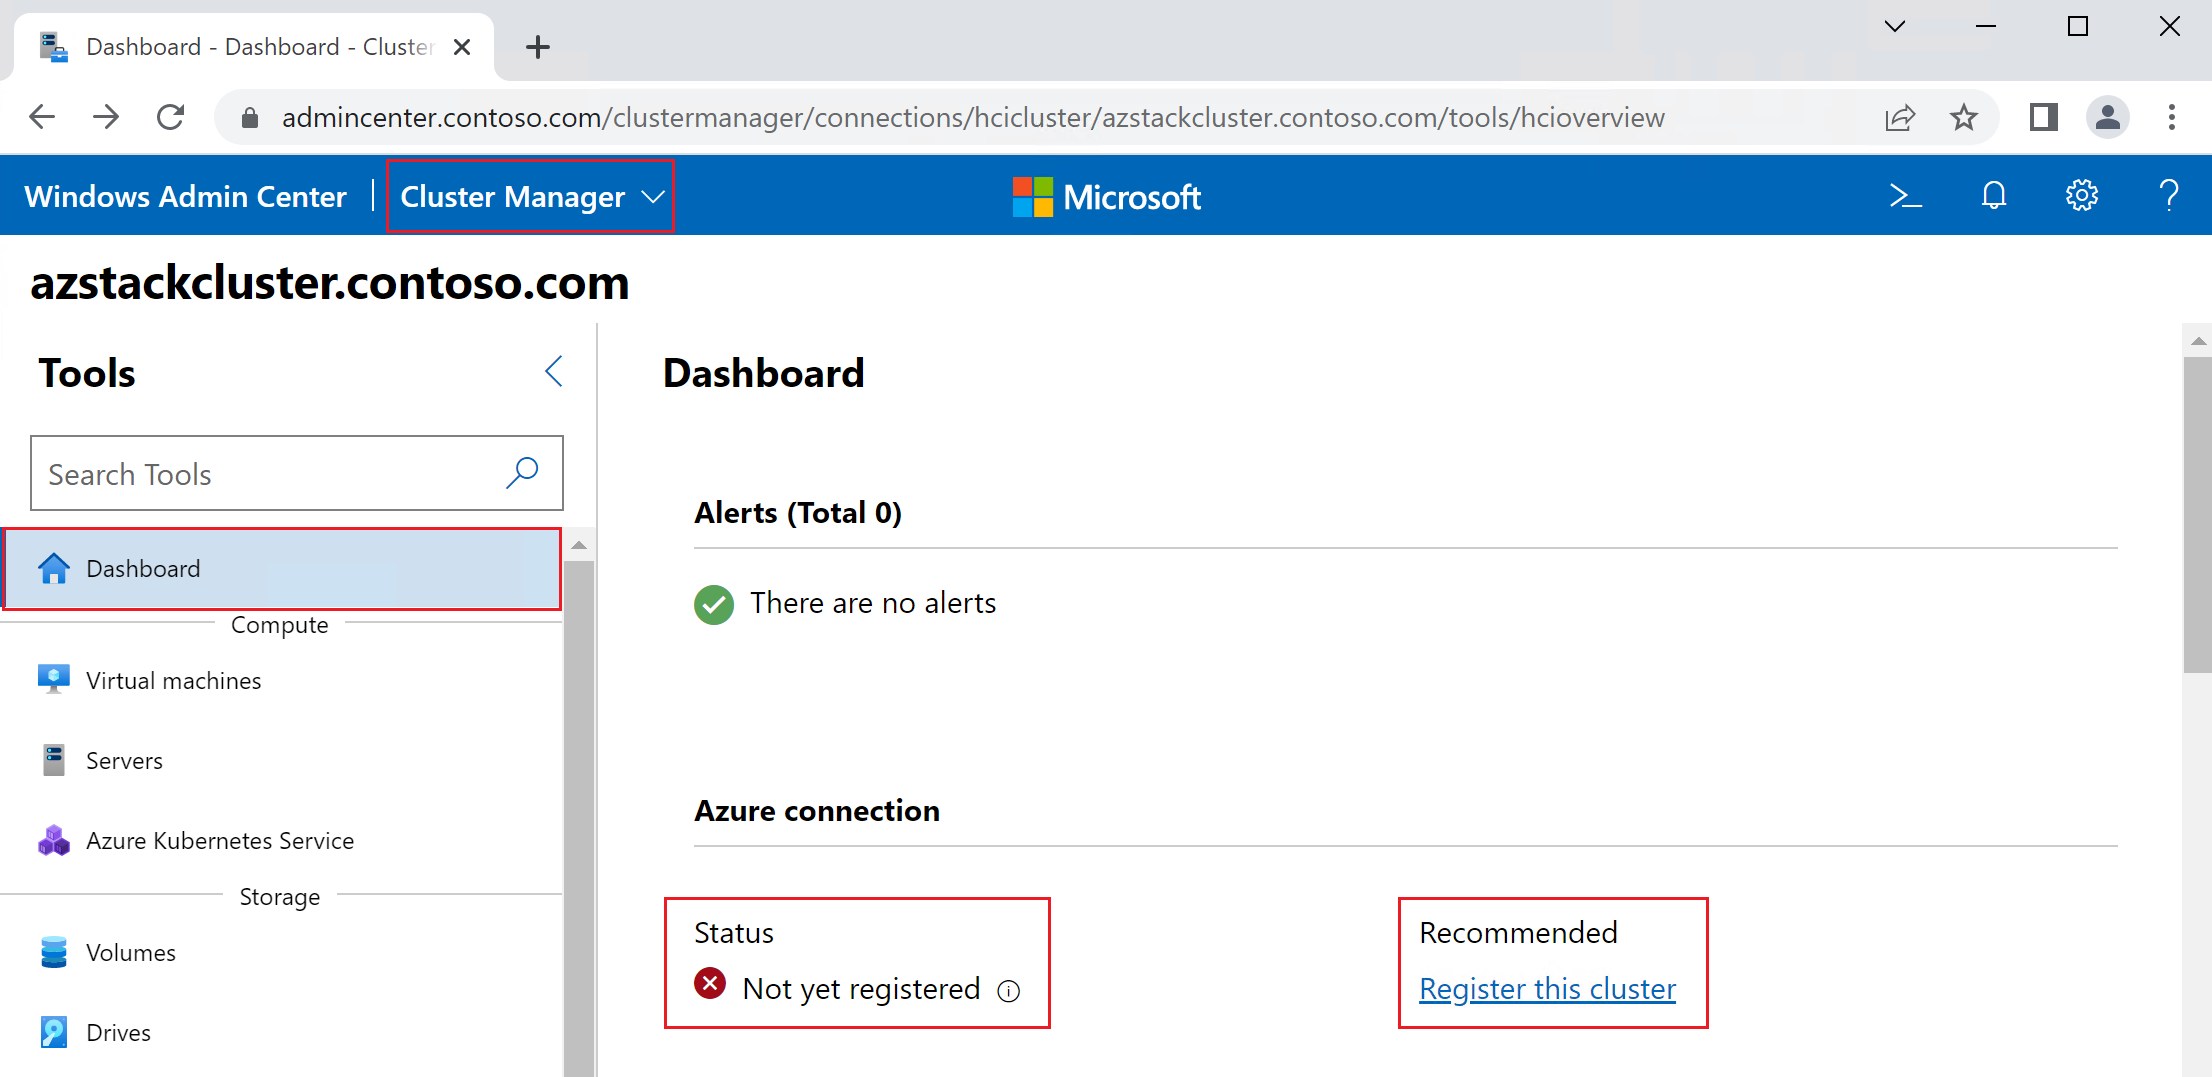 Register this cluster on dashboard